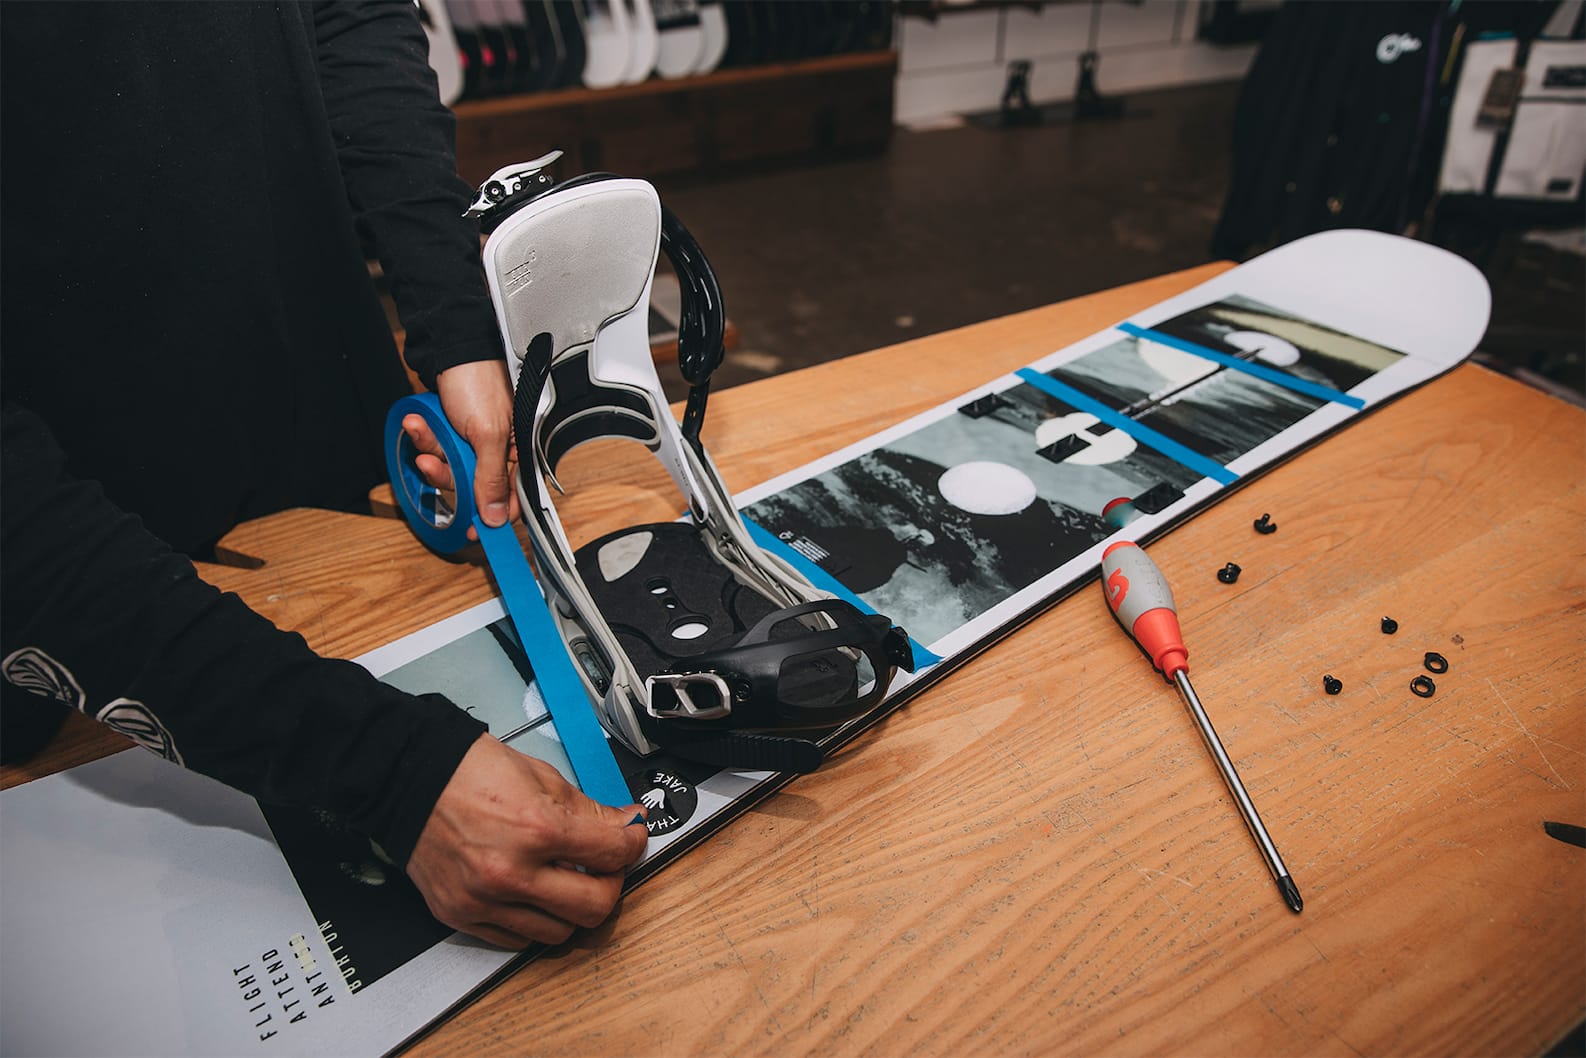 A Beginner's Guide on How to Set up a Snowboard | Burton Snowboards